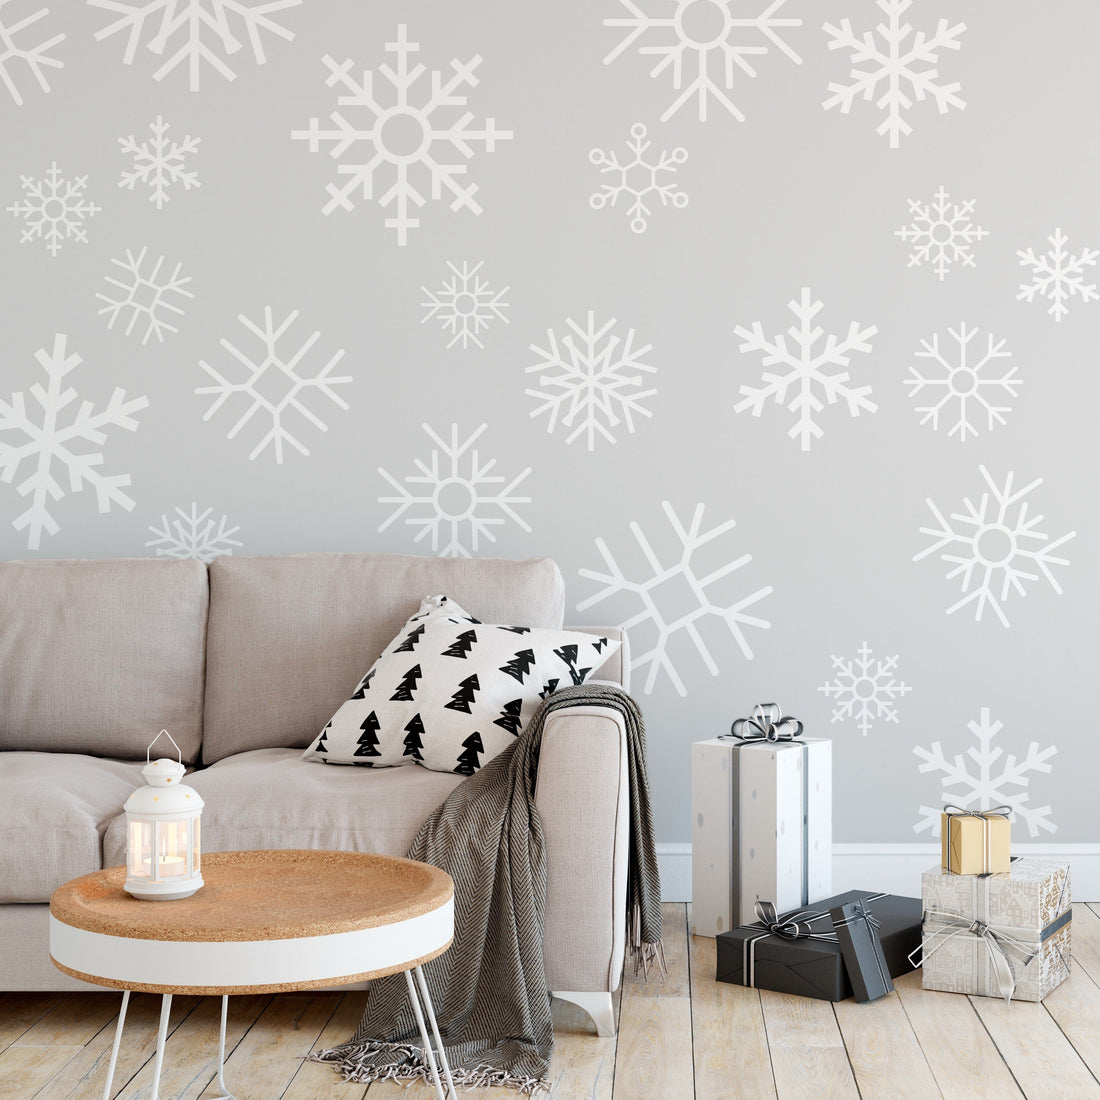 Get Set Up for Santa  - Decorating for Christmas using removable decals!